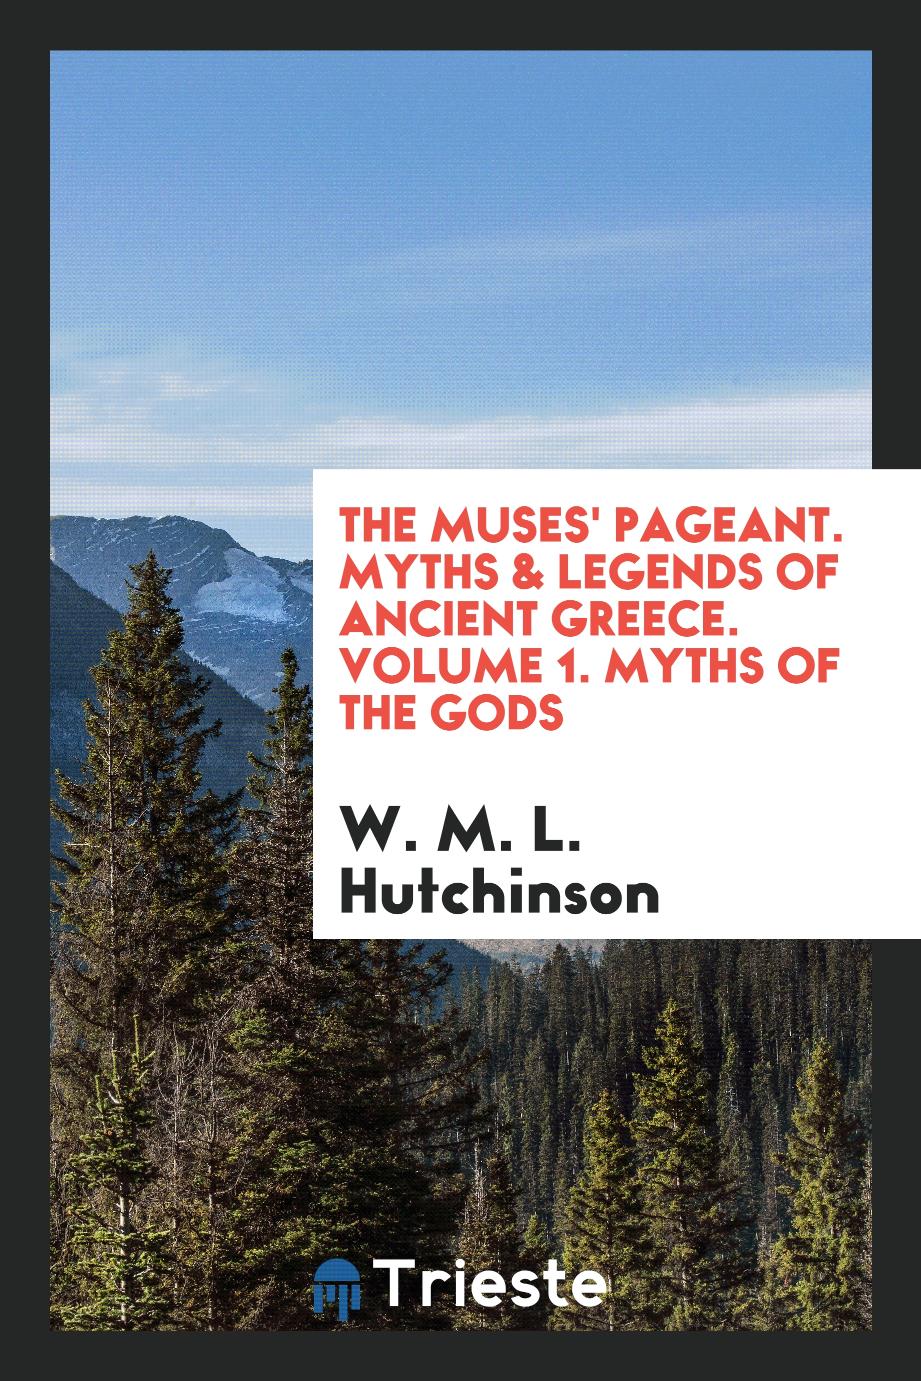 The Muses' pageant. Myths & legends of ancient Greece. Volume 1. Myths of the Gods